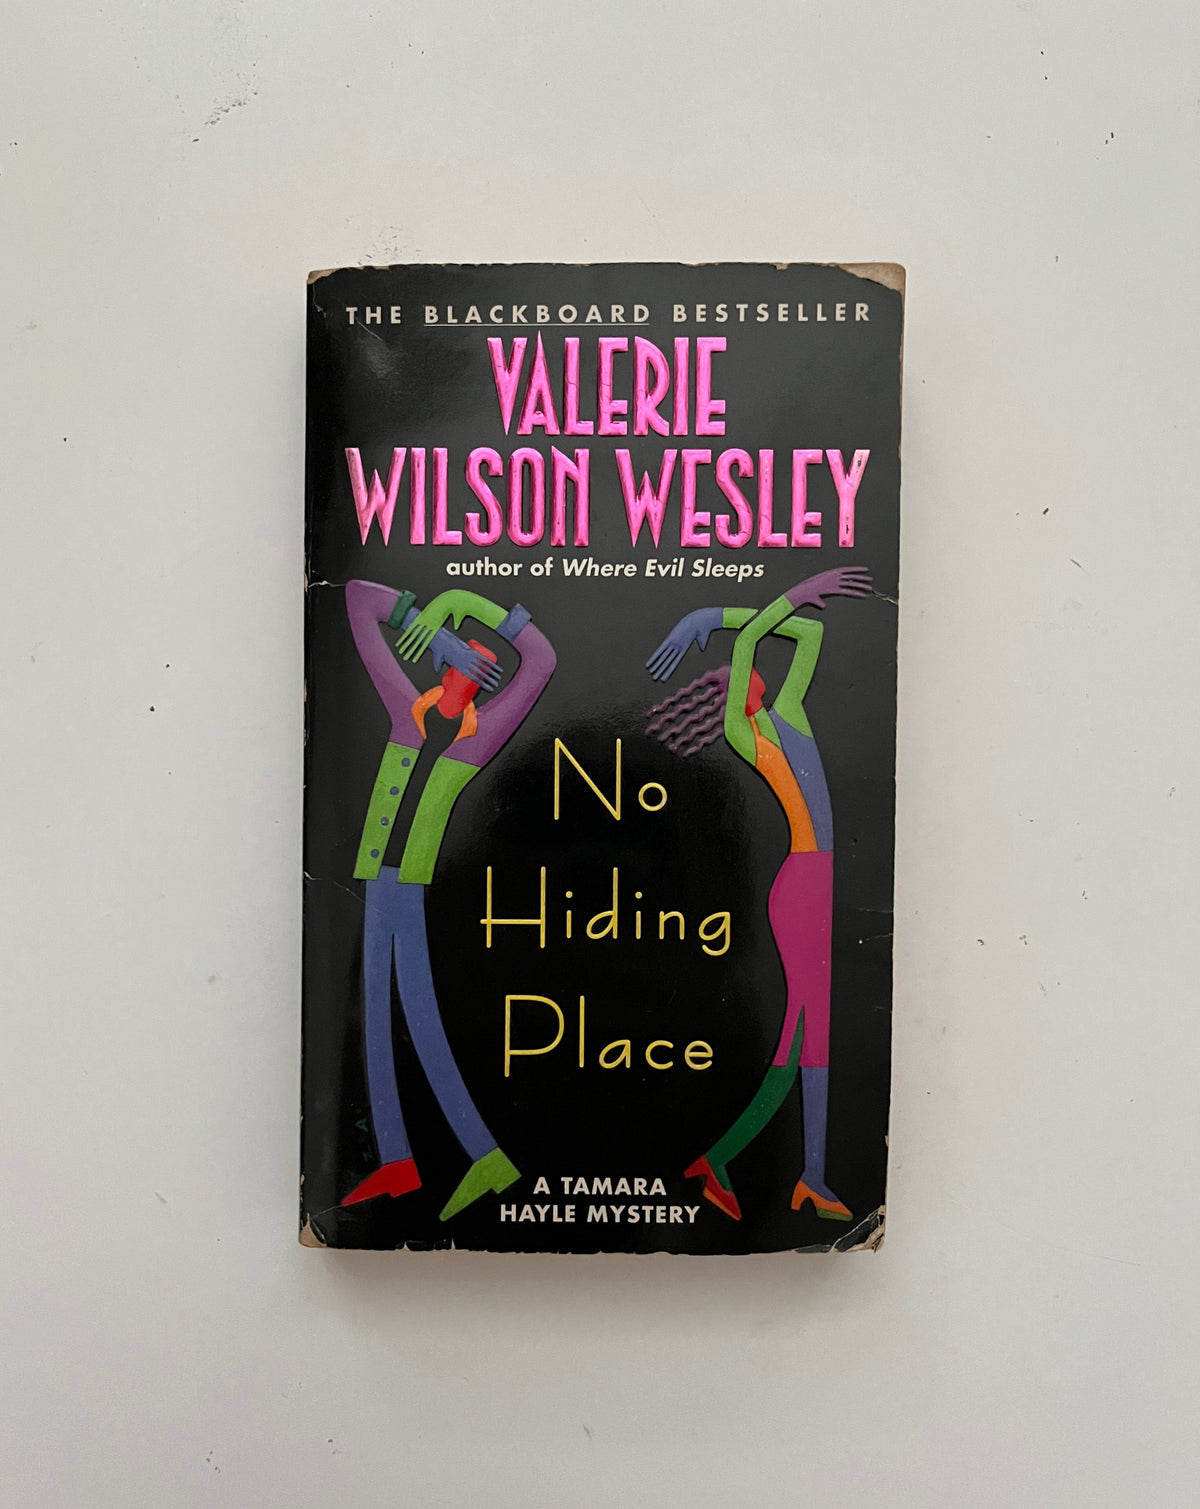 Donate: No Hiding Place by Valerie Wilson Wesley